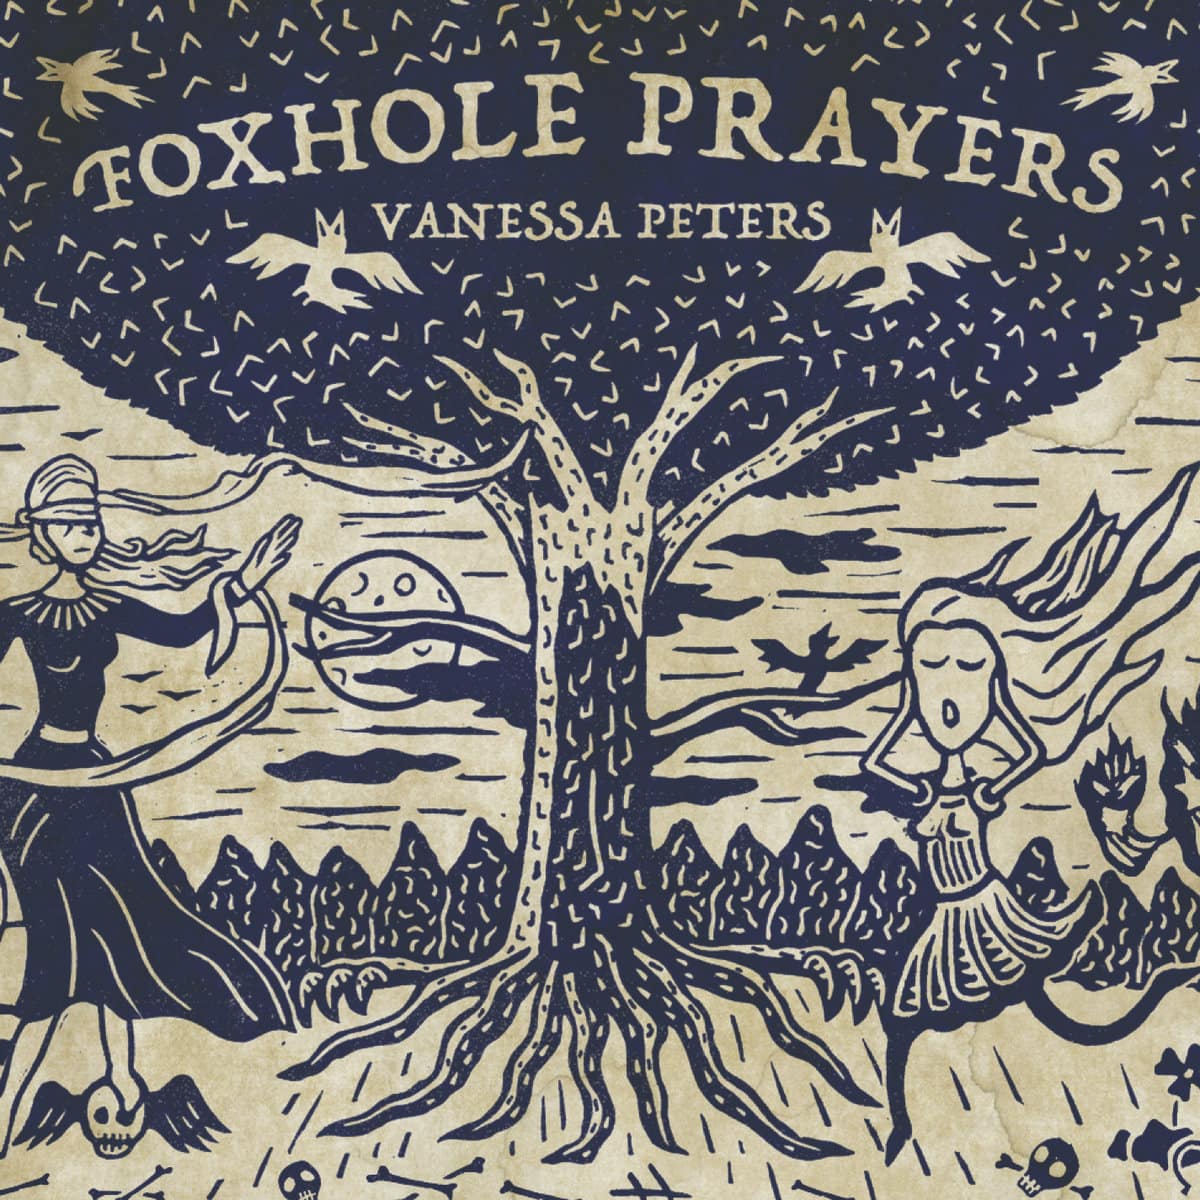 Foxhole Prayers album cover - etching